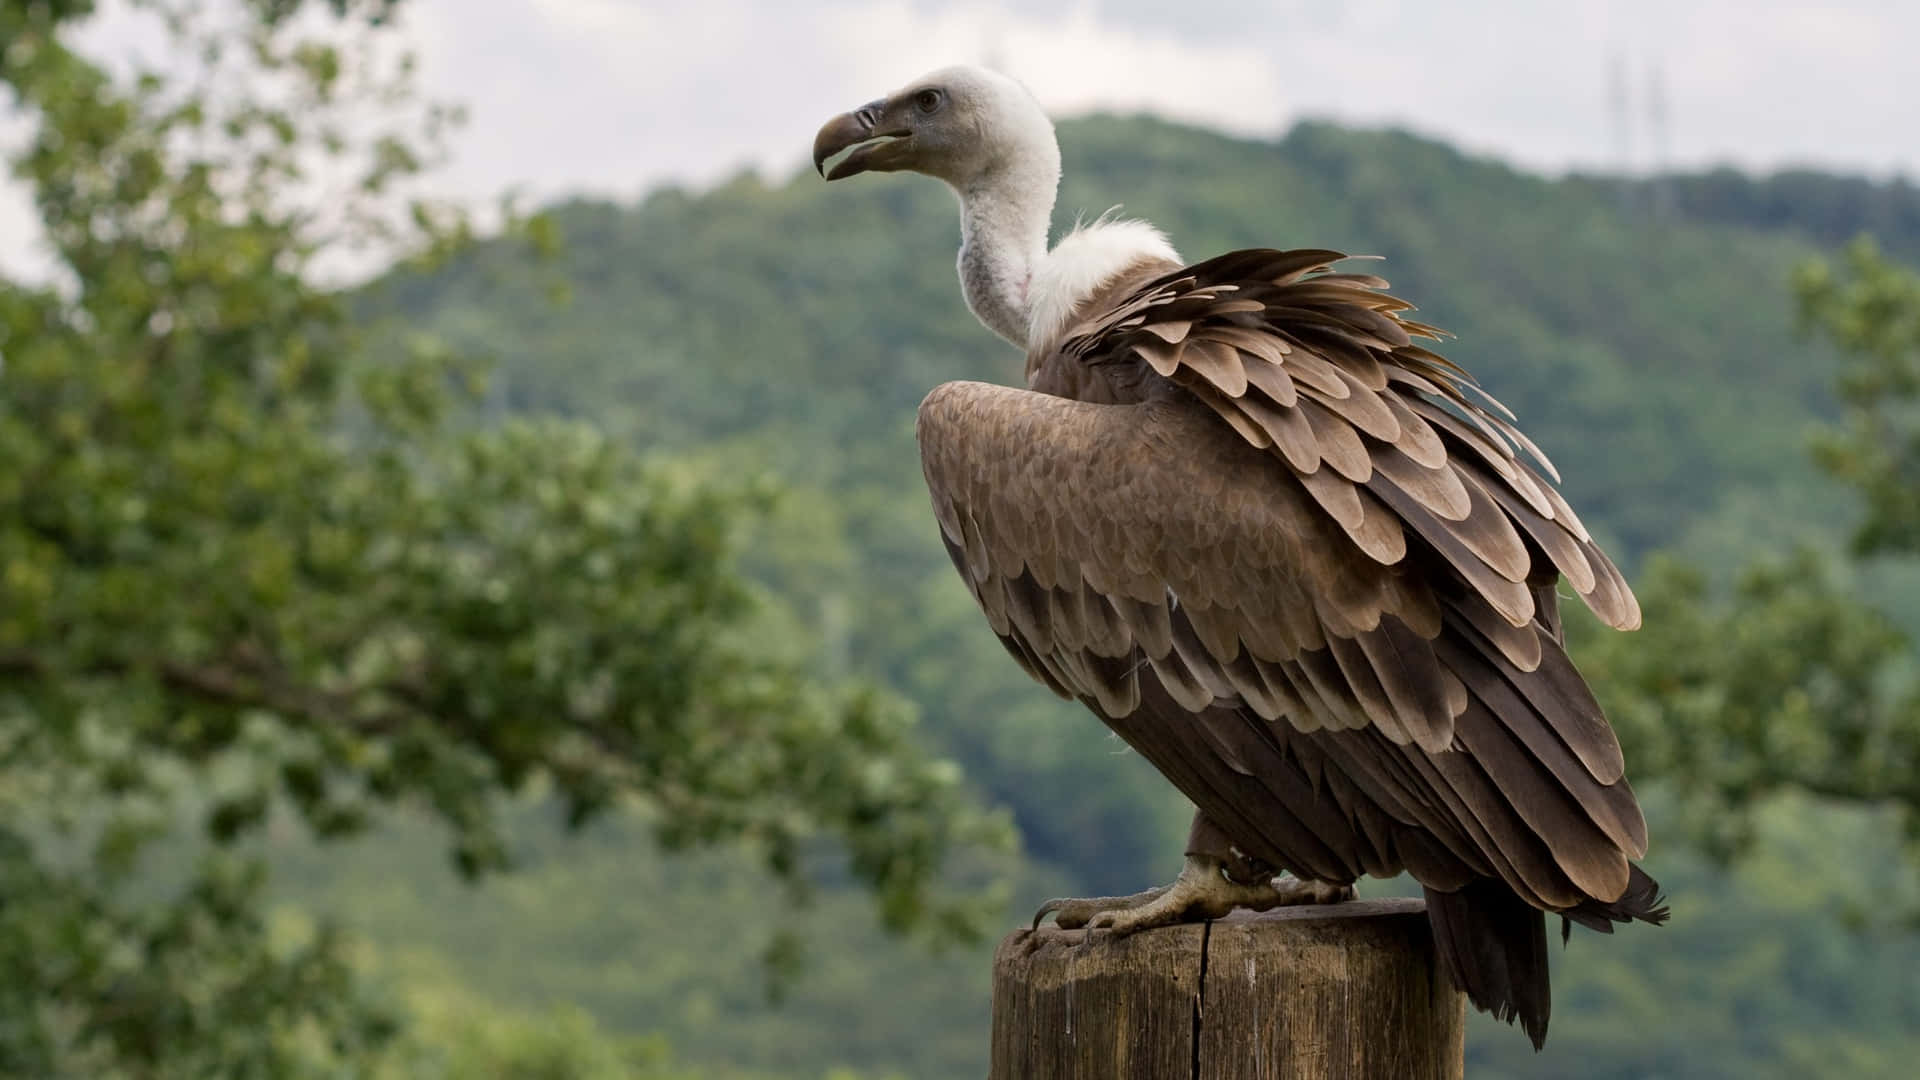 Majestic Vulture Perched Outdoors Wallpaper